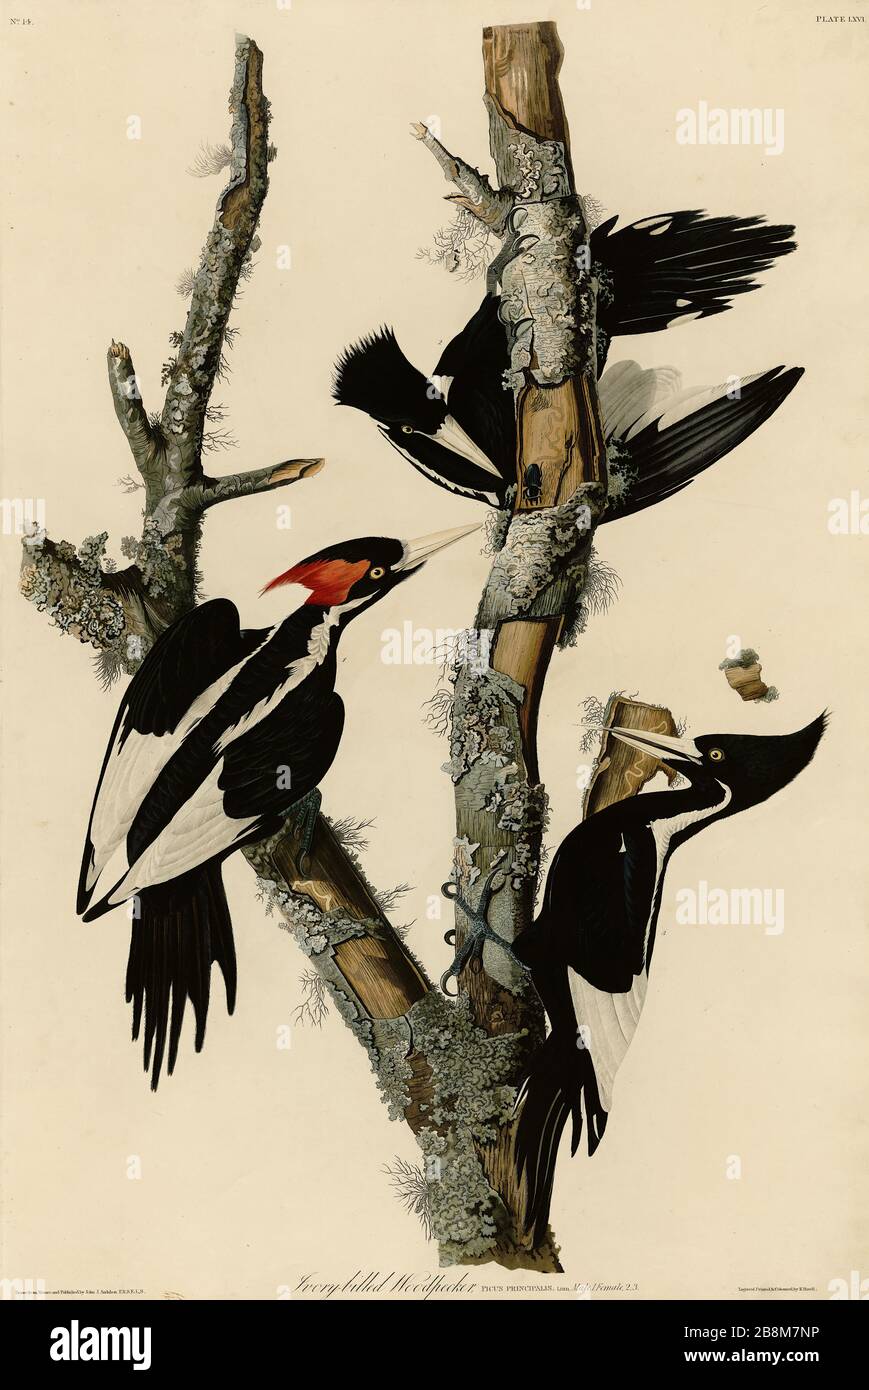 Plate 66 Ivory-billed Woodpecker, from The Birds of America folio (1827–1839) by John James Audubon - Very high resolution and quality edited image Stock Photo